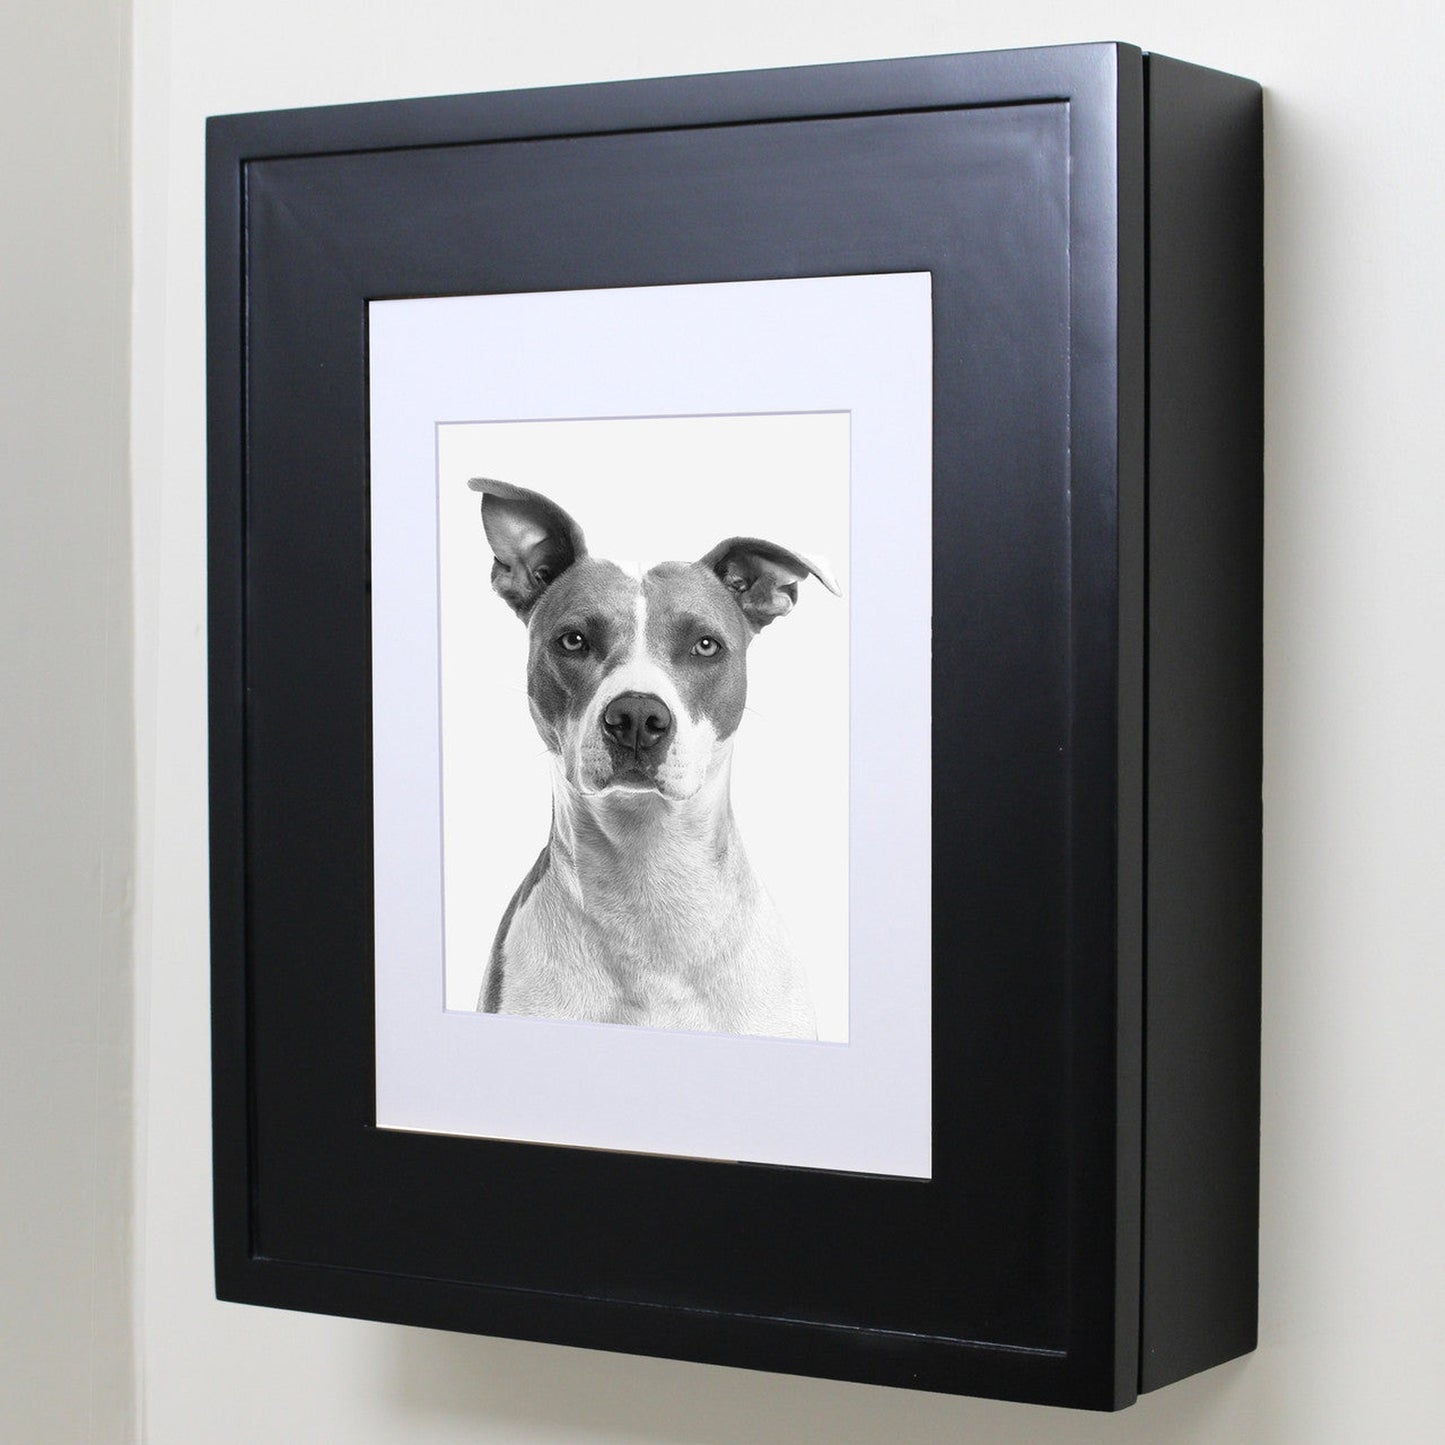 Fox Hollow Furnishings 20" x 17" Black Wall Mount Picture Frame Medicine Cabinet With Mirror and Ivory 8" x 10" Matting